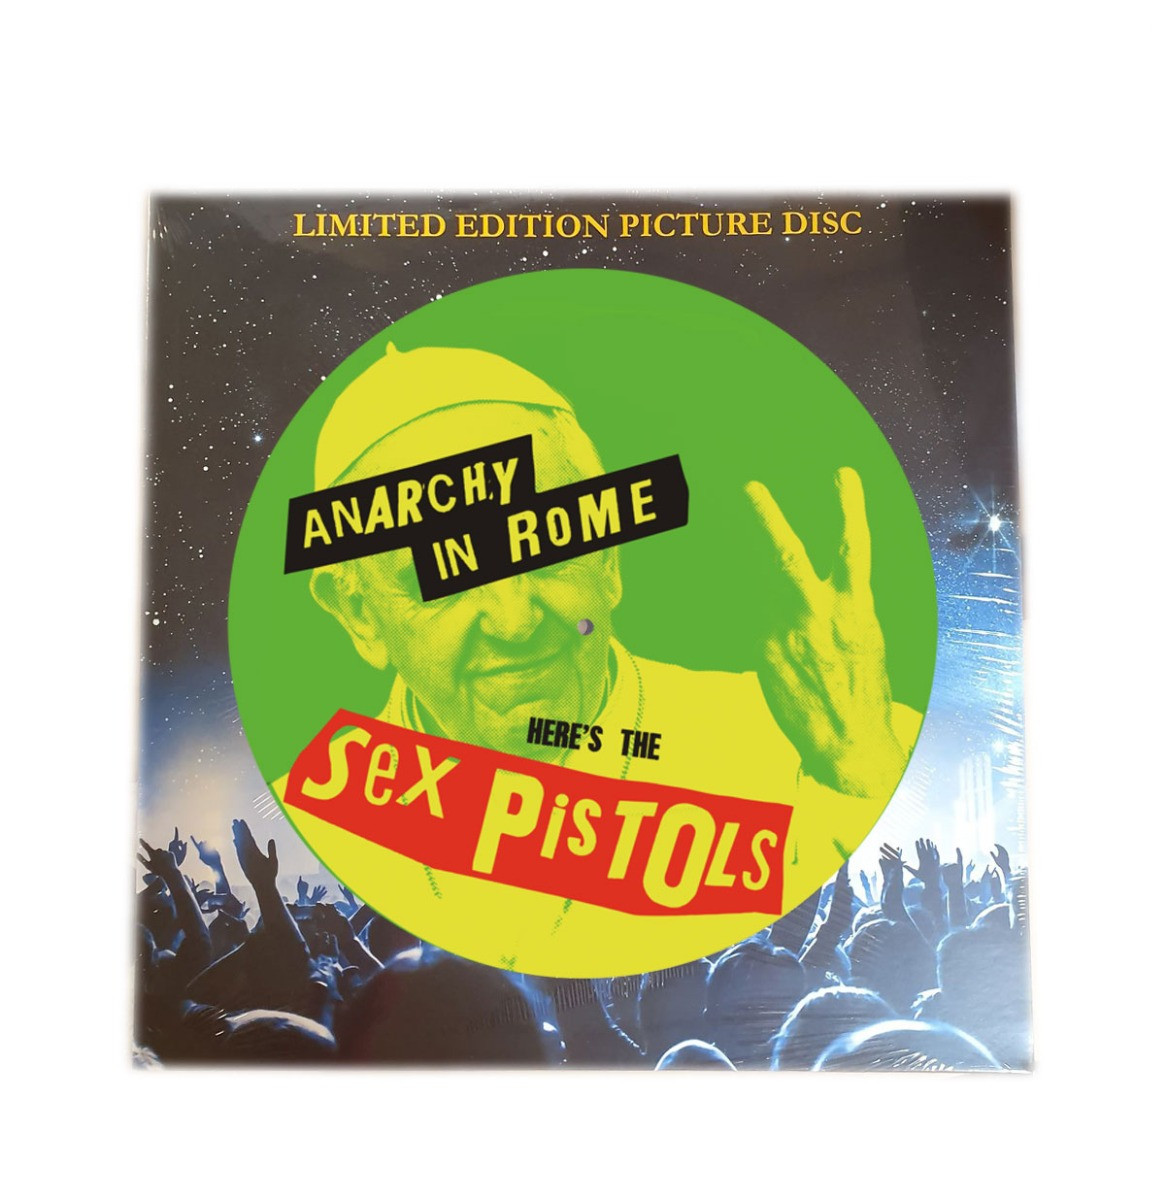 Sex Pistols - Anarchy in Rome Picture Disc LP